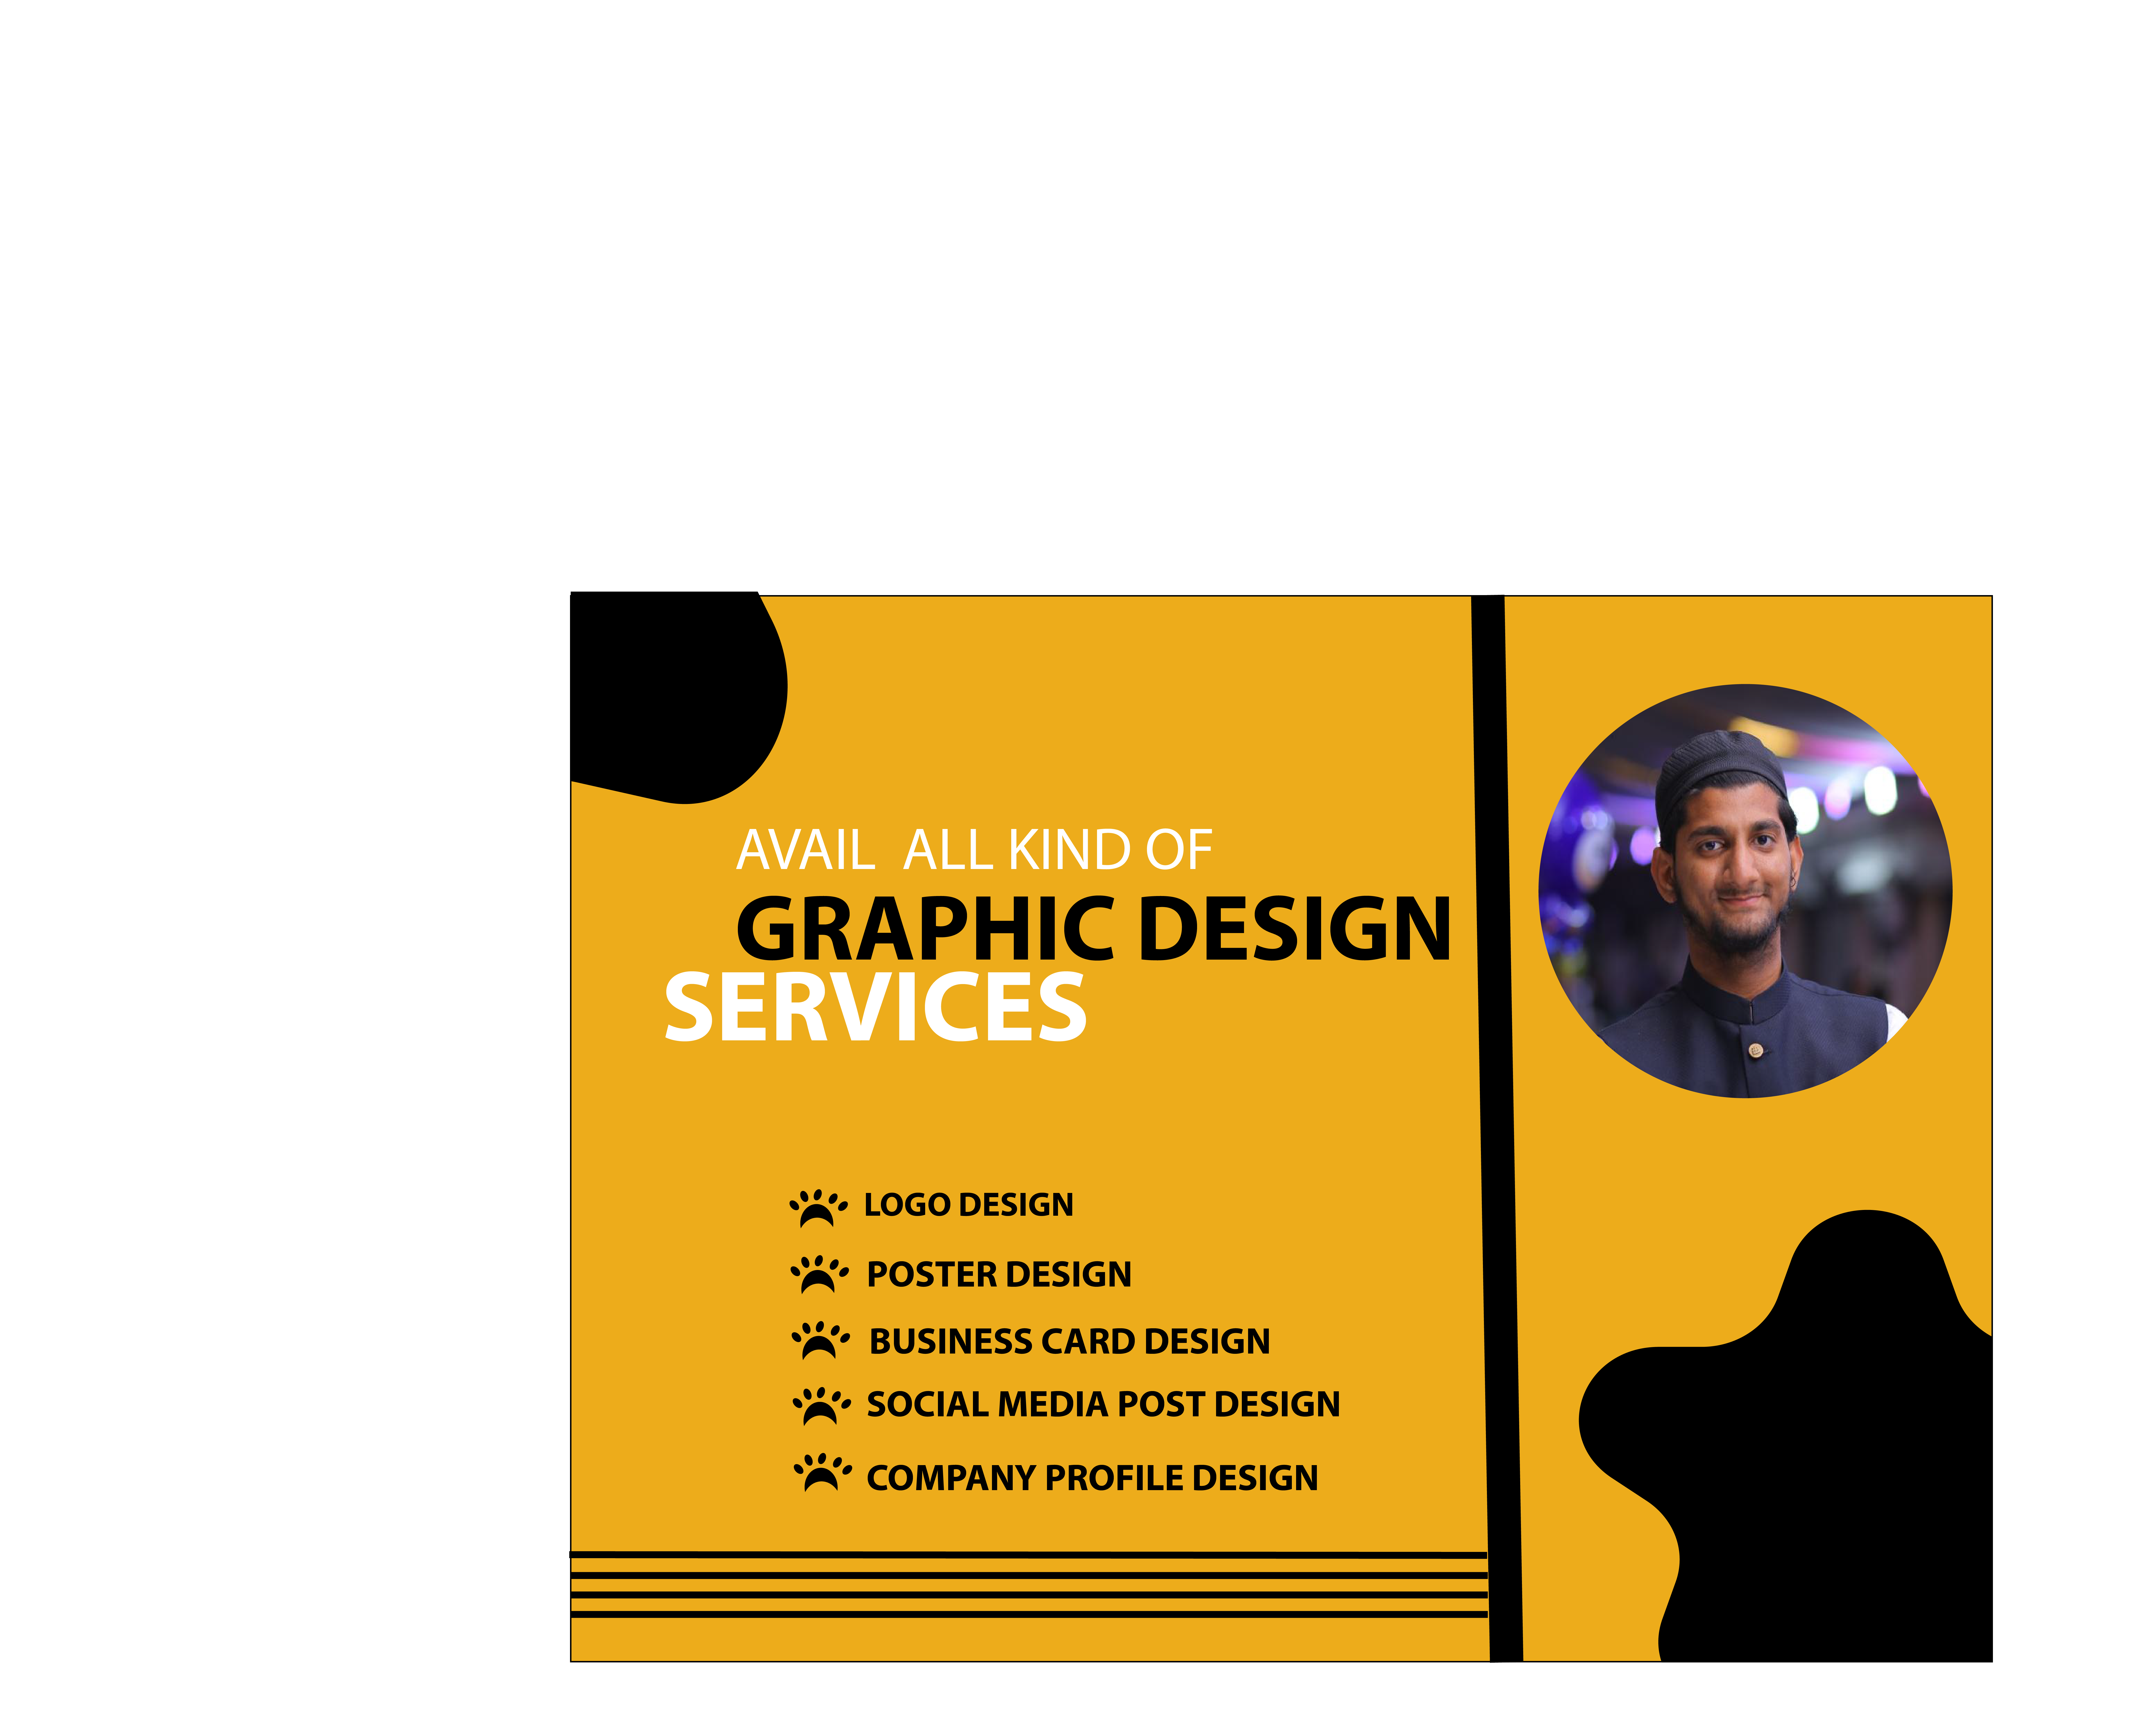 i will design modern and minimalist logo , business card , latter head, and much more